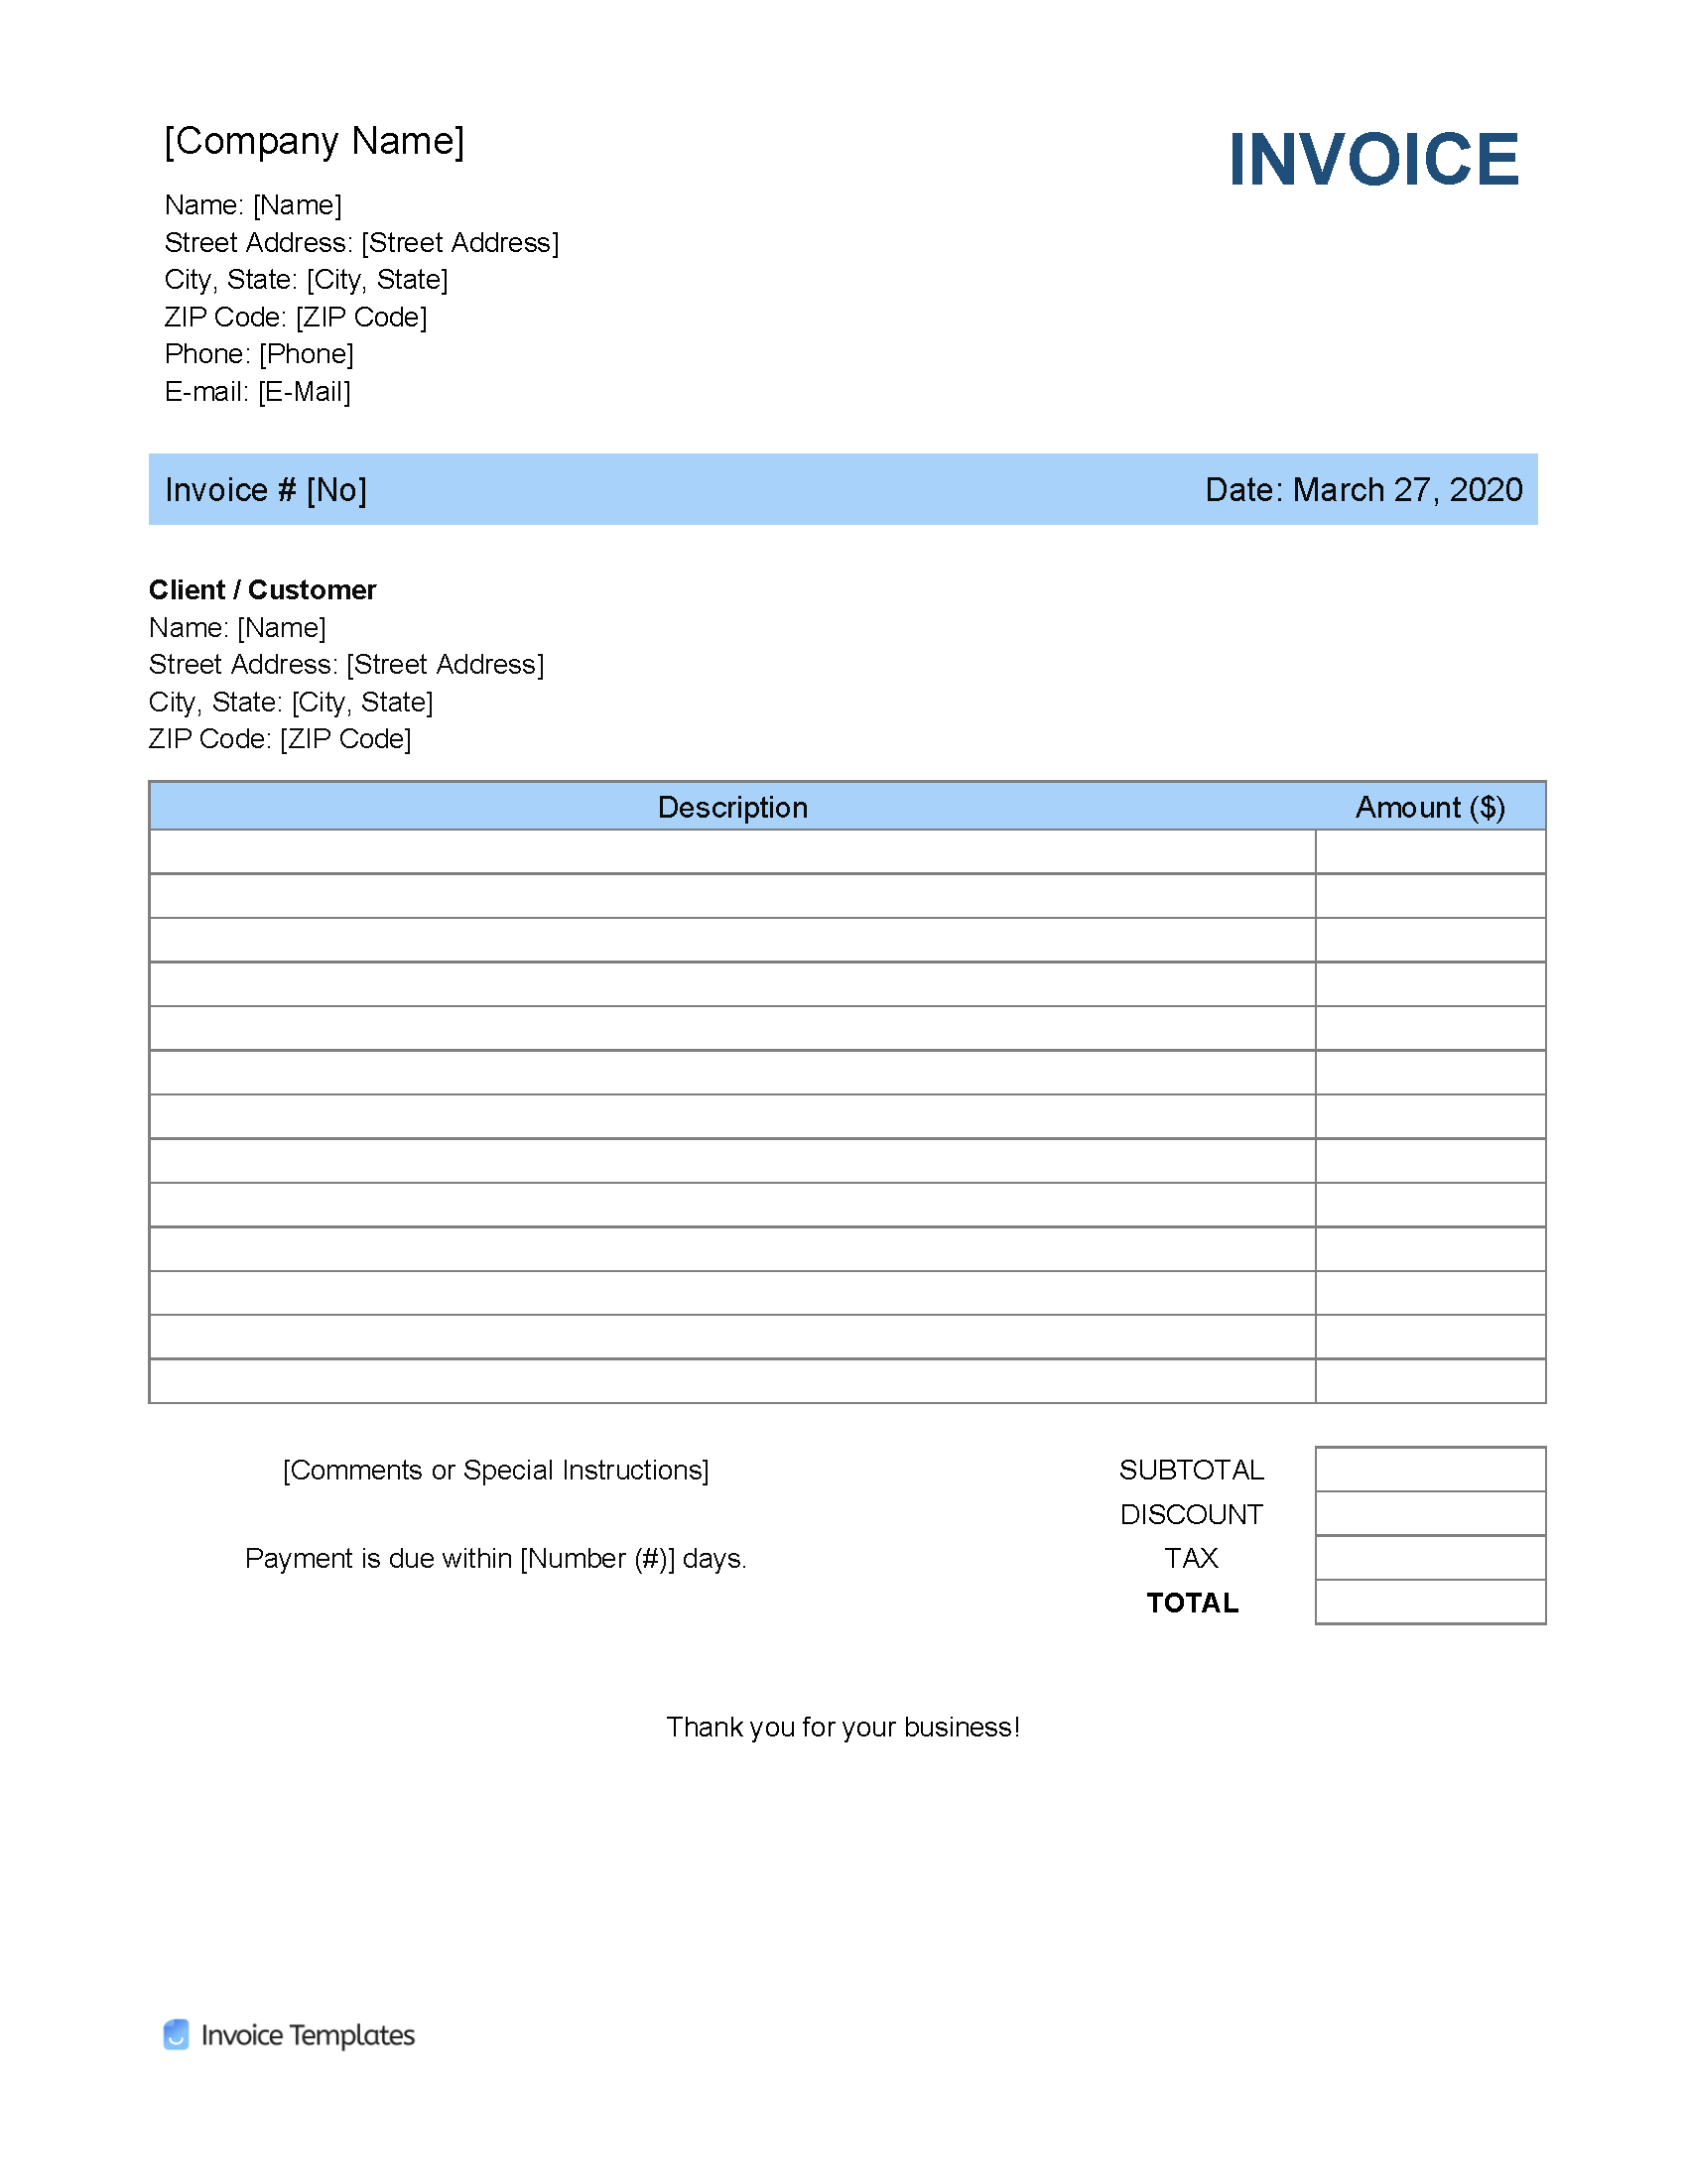 Invoice Template Ms Word from invoicetemplates.com